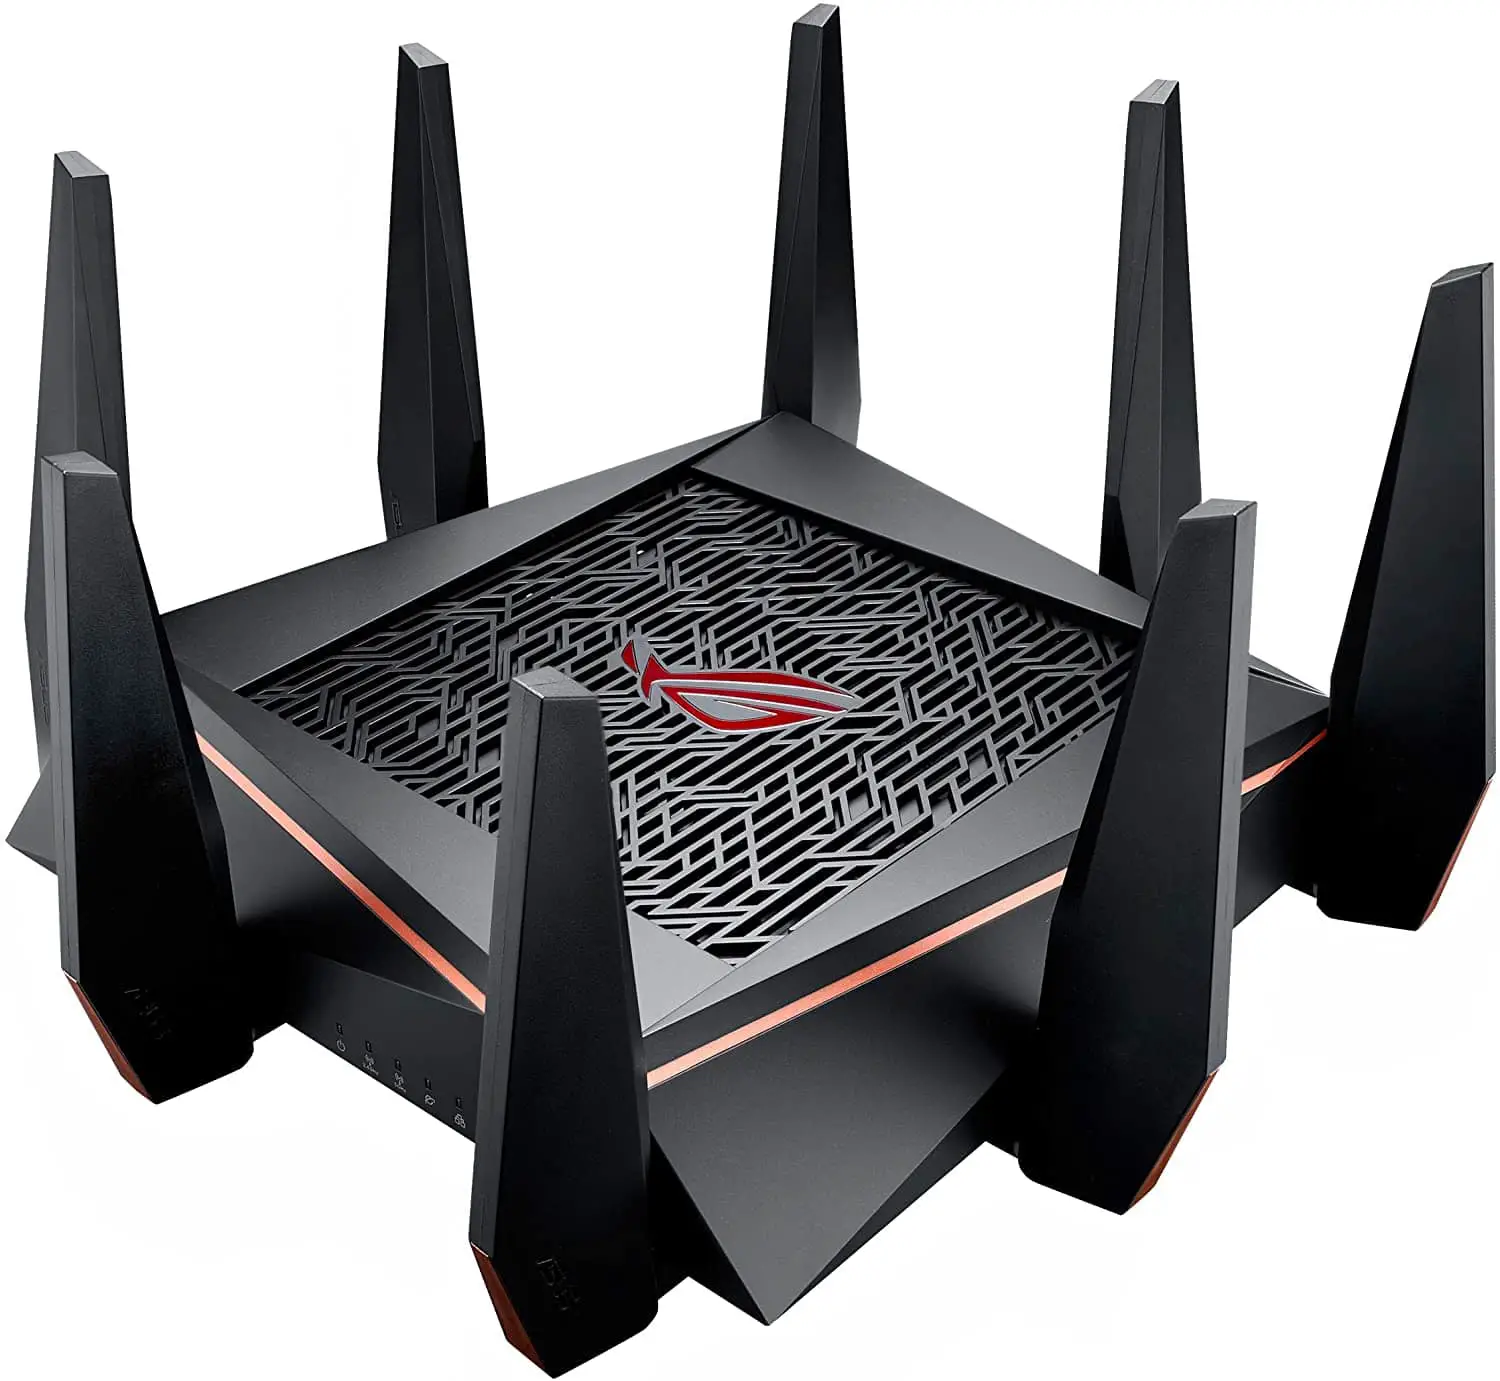 ASUS GT-AC3000 Gaming Router Tri-band WiFi For VR & 4K streaming